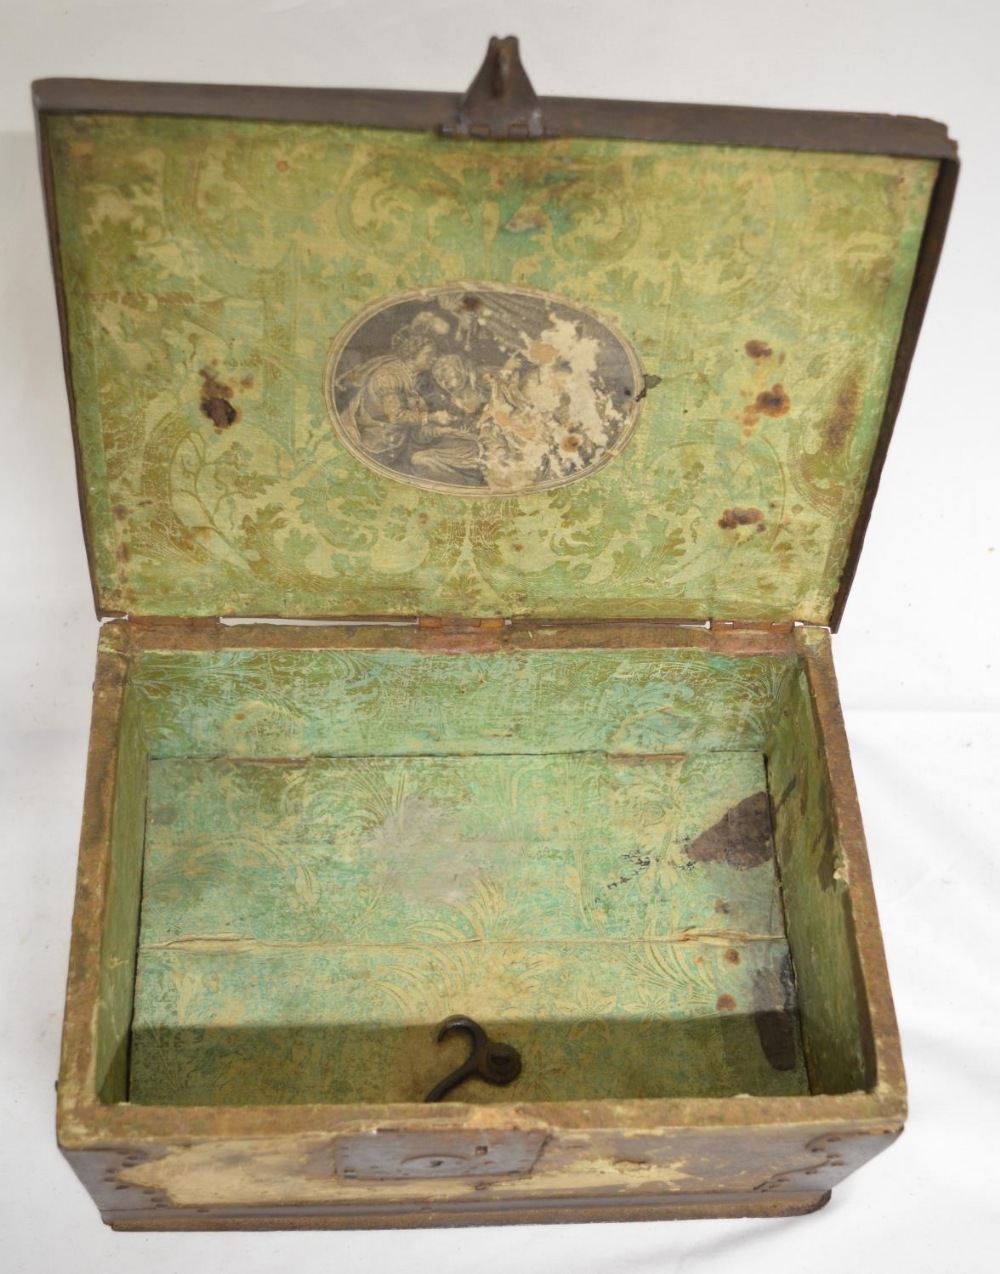 Circa 17th century leather bound table box with wrought metal flap lock and ornate metal pinned - Image 2 of 8